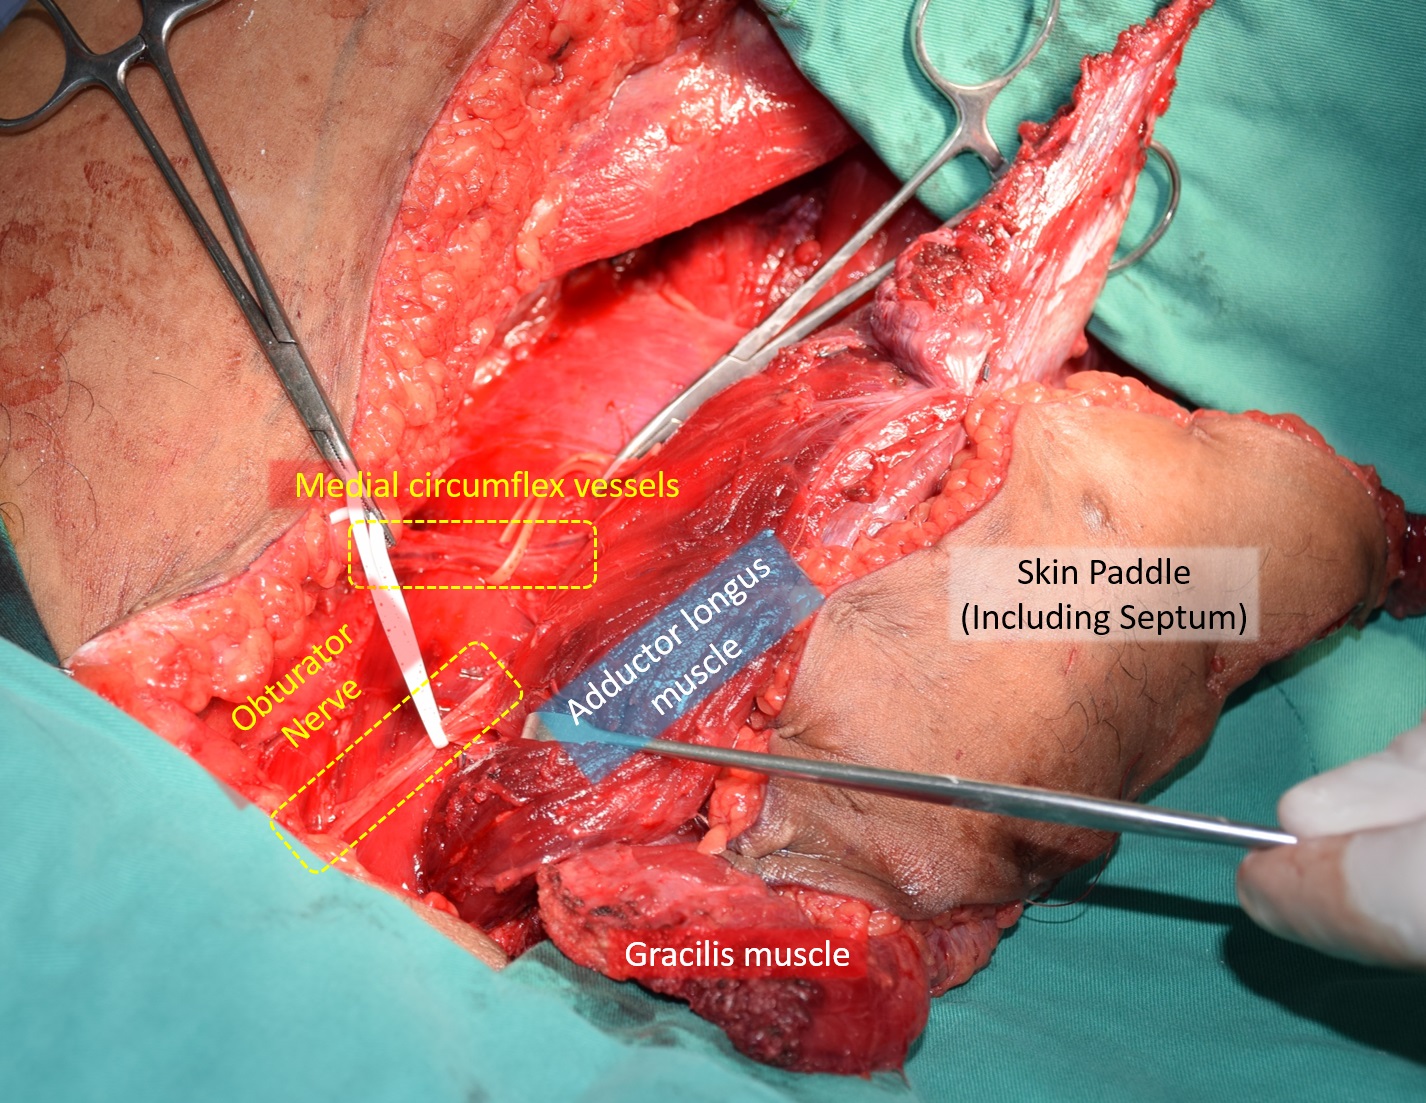 Double Functioning Free Muscle Transfer as a Salvage Procedure for Brachial Plexus Injury After Failed Nerve Transfer